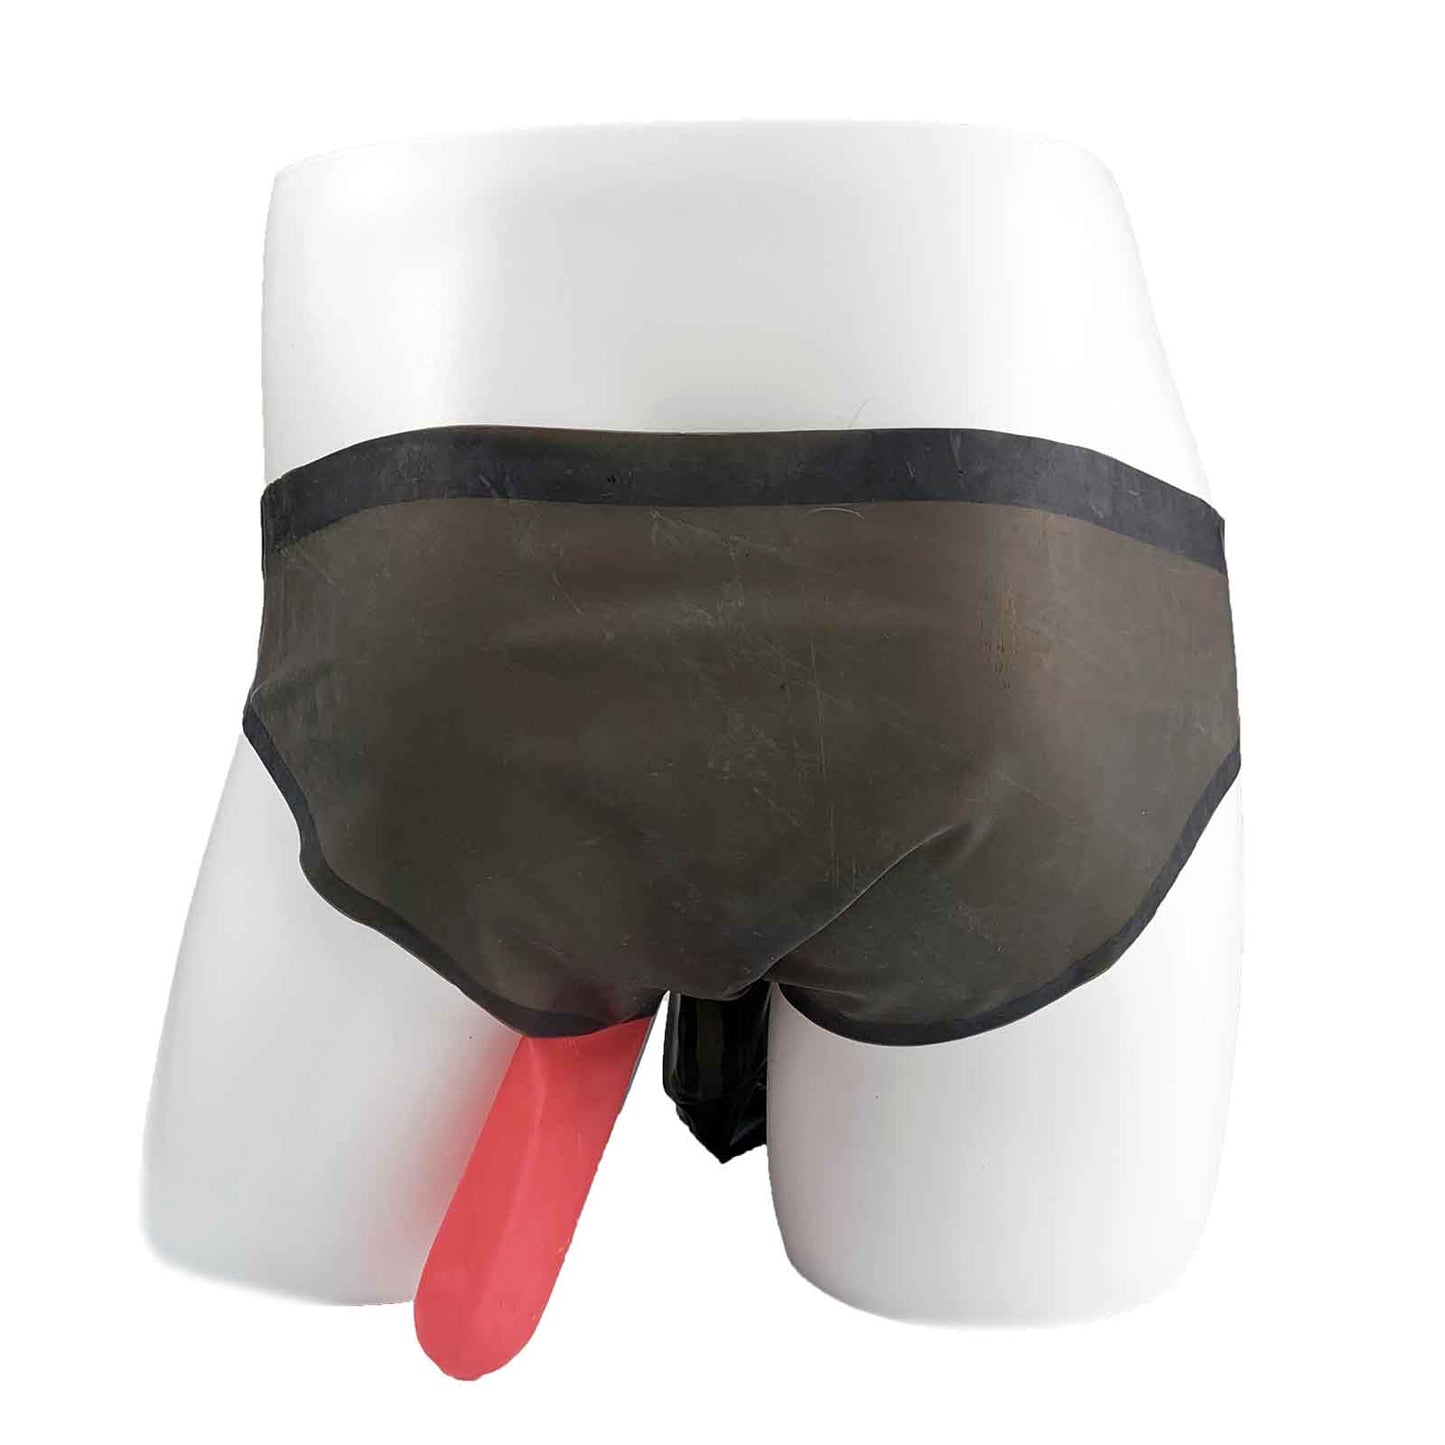 MONNIK Latex Briefs Rubber Underwear Black Shorts Personality High Stretch with Two Condom for Bodysuit Fetish Party